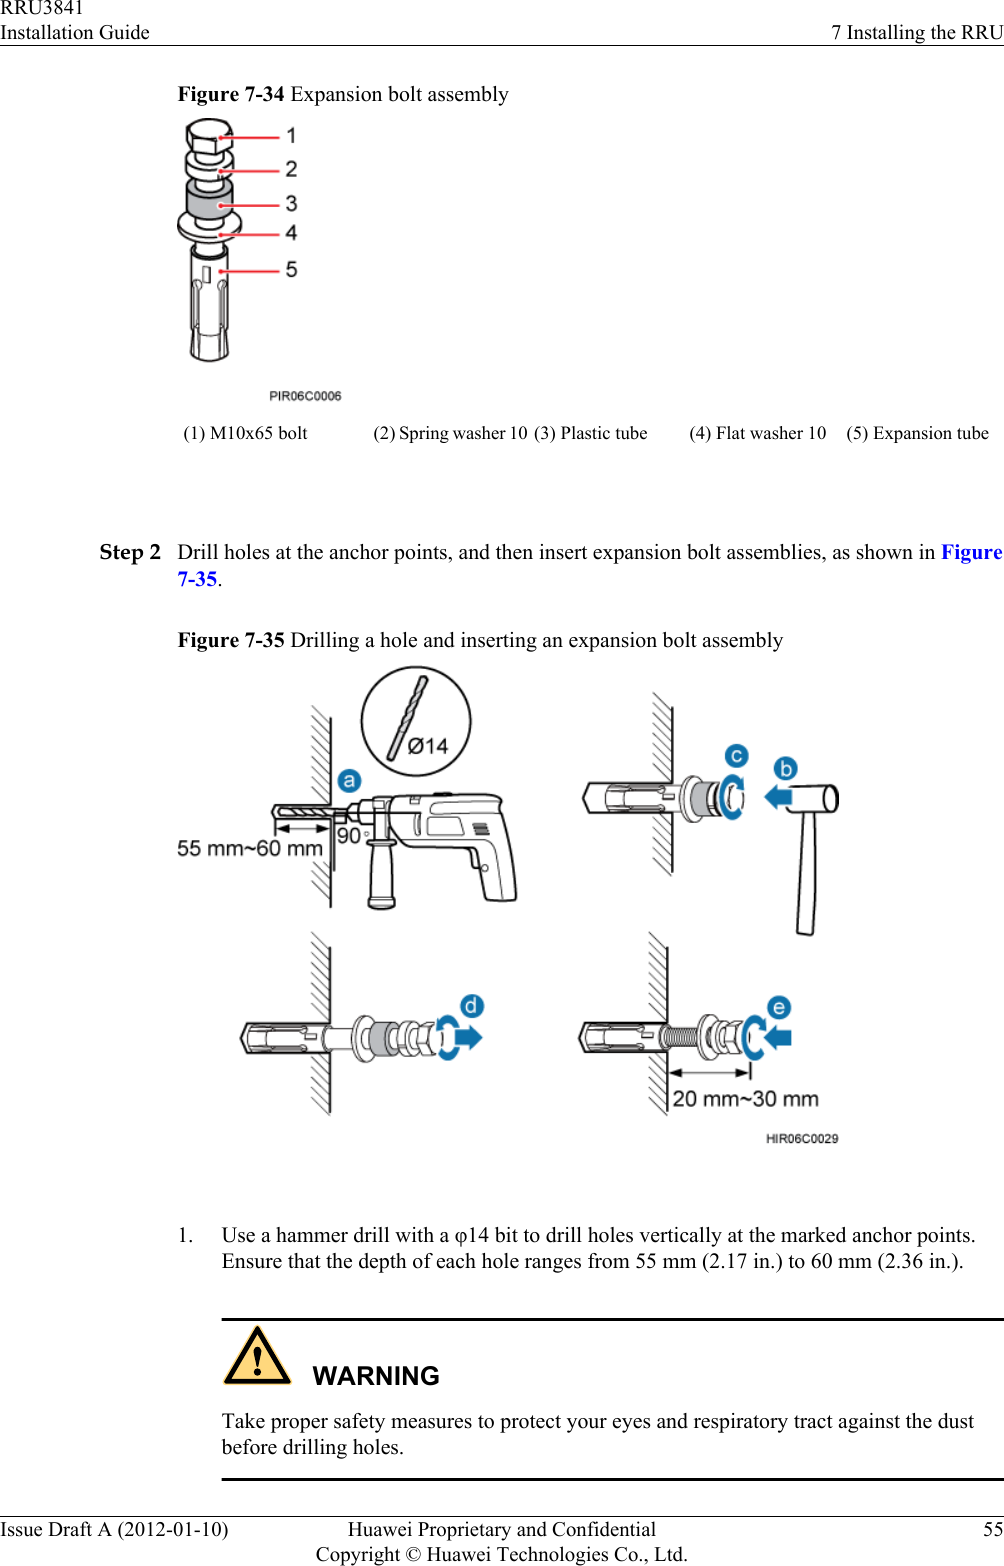 Figure 7-34 Expansion bolt assembly(1) M10x65 bolt (2) Spring washer 10 (3) Plastic tube (4) Flat washer 10 (5) Expansion tube Step 2 Drill holes at the anchor points, and then insert expansion bolt assemblies, as shown in Figure7-35.Figure 7-35 Drilling a hole and inserting an expansion bolt assembly 1. Use a hammer drill with a φ14 bit to drill holes vertically at the marked anchor points.Ensure that the depth of each hole ranges from 55 mm (2.17 in.) to 60 mm (2.36 in.).WARNINGTake proper safety measures to protect your eyes and respiratory tract against the dustbefore drilling holes.RRU3841Installation Guide 7 Installing the RRUIssue Draft A (2012-01-10) Huawei Proprietary and ConfidentialCopyright © Huawei Technologies Co., Ltd.55